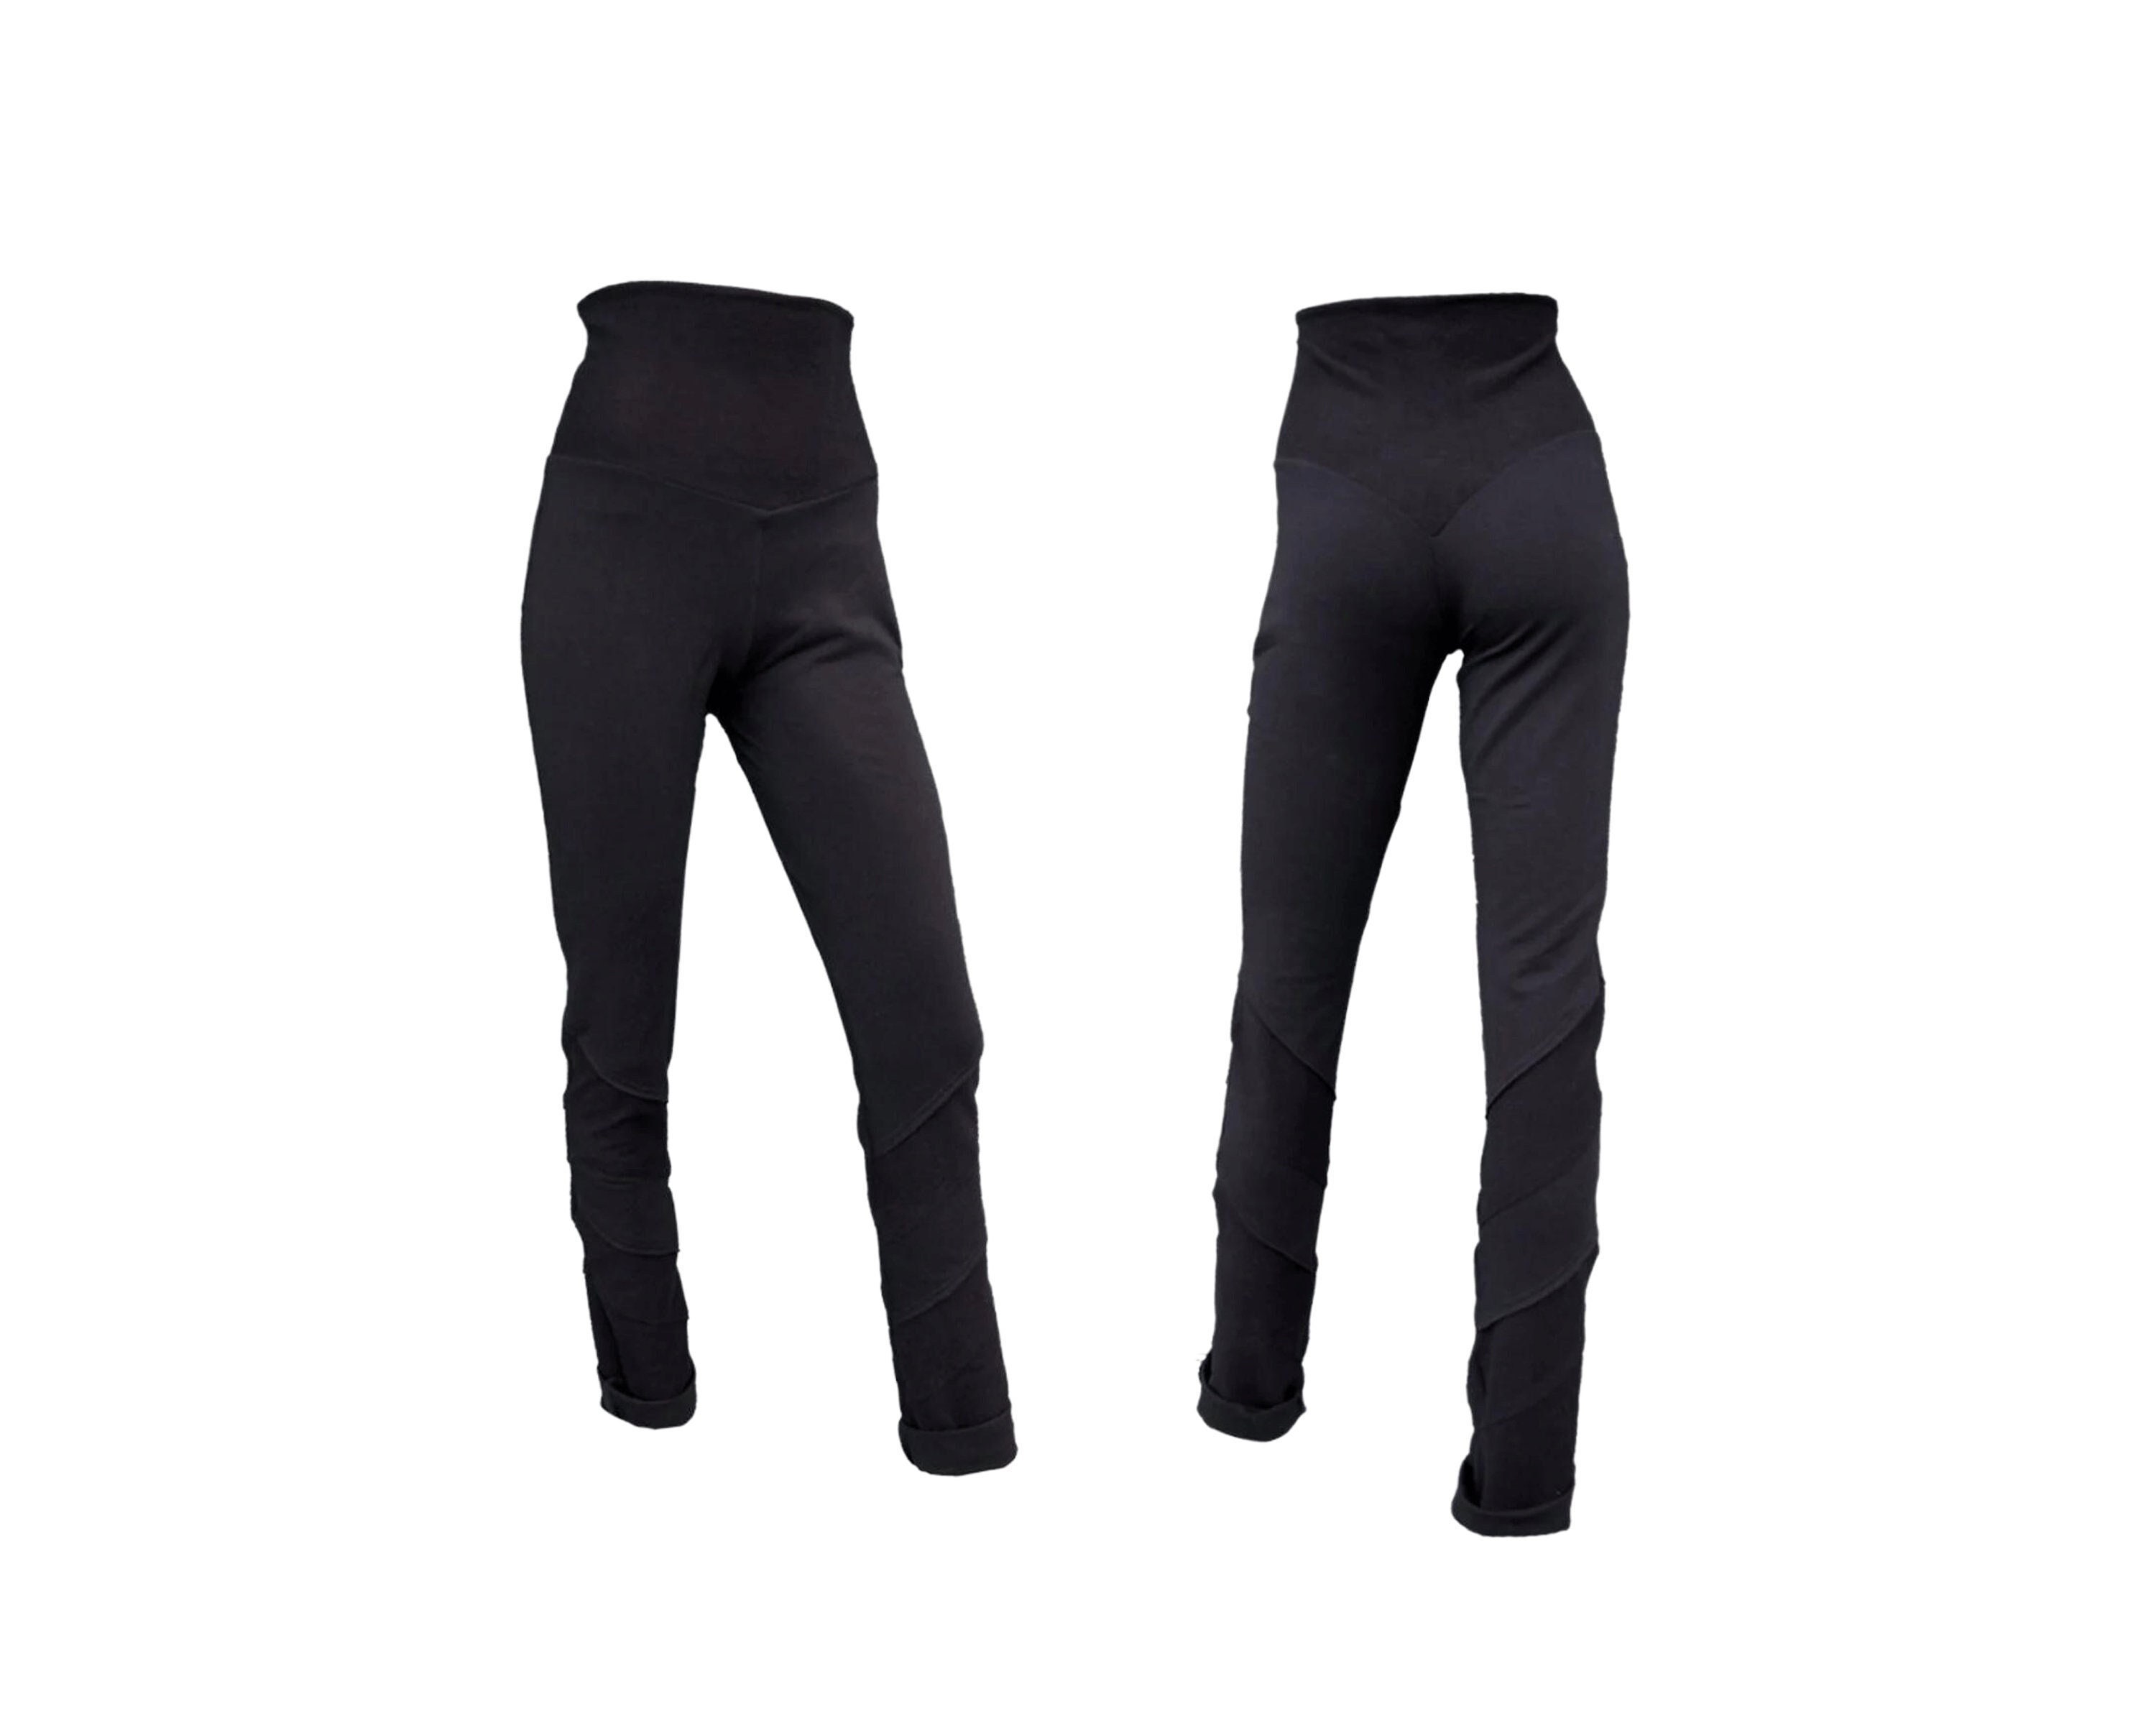 IUGA Fleece Lined Pants Women Bootcut Yoga Pants with Pockets Flare  Leggings for Women Thermal Winter Pants Black at  Women's Clothing  store